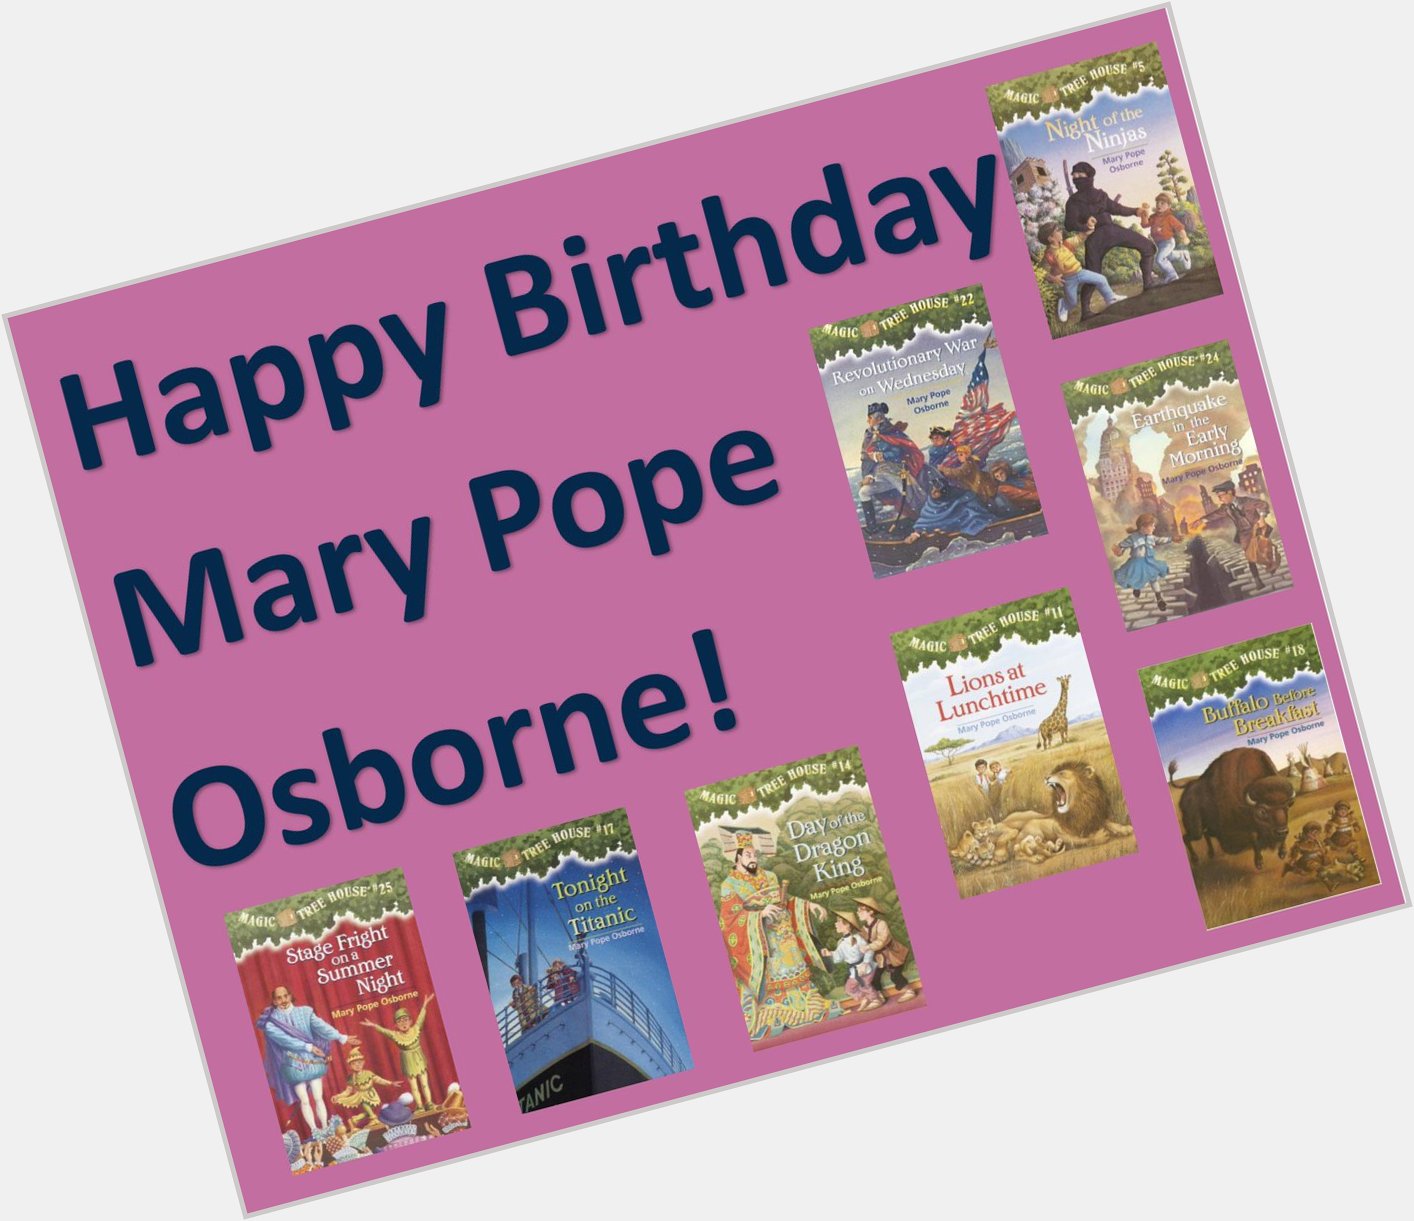 Happy birthday to Mary Pope Osborne, author of the Magic Tree House chapter book series! 